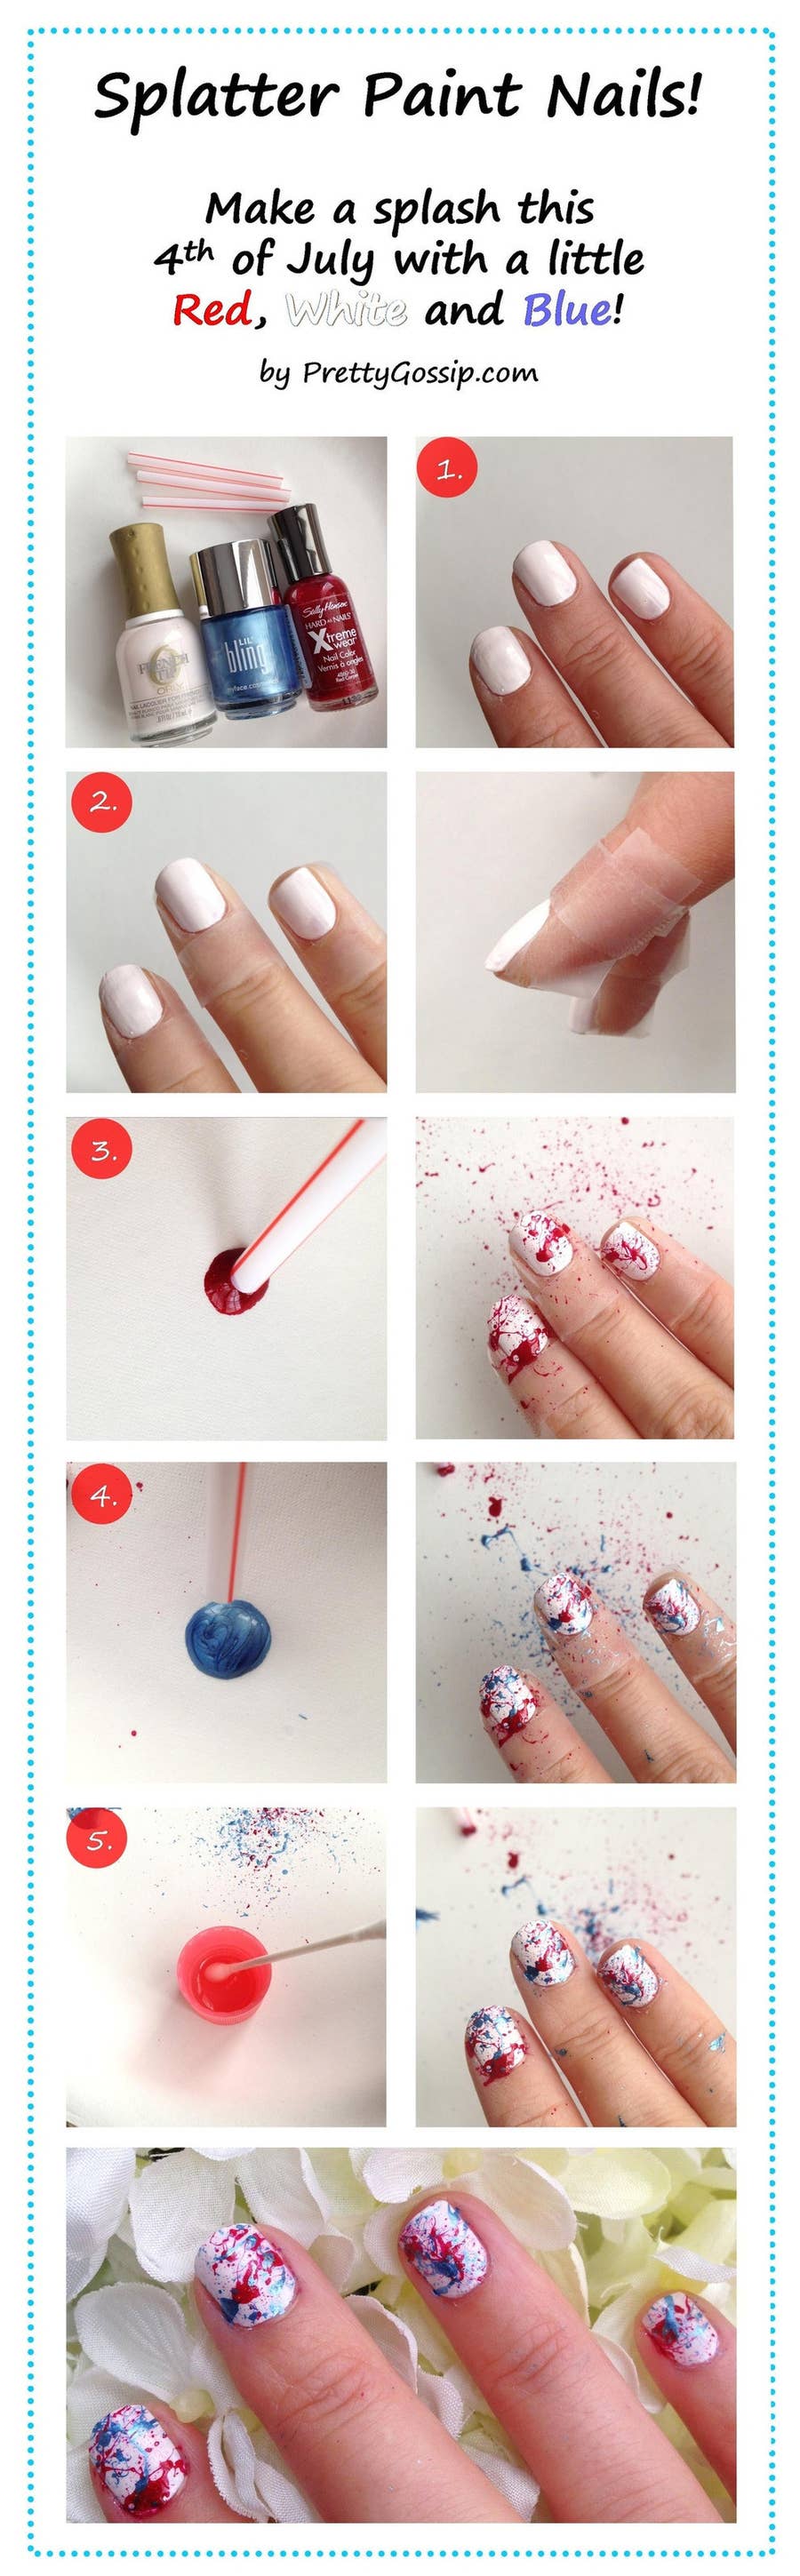 5 Easy Gel Nail Ideas to Try at Home - EGO